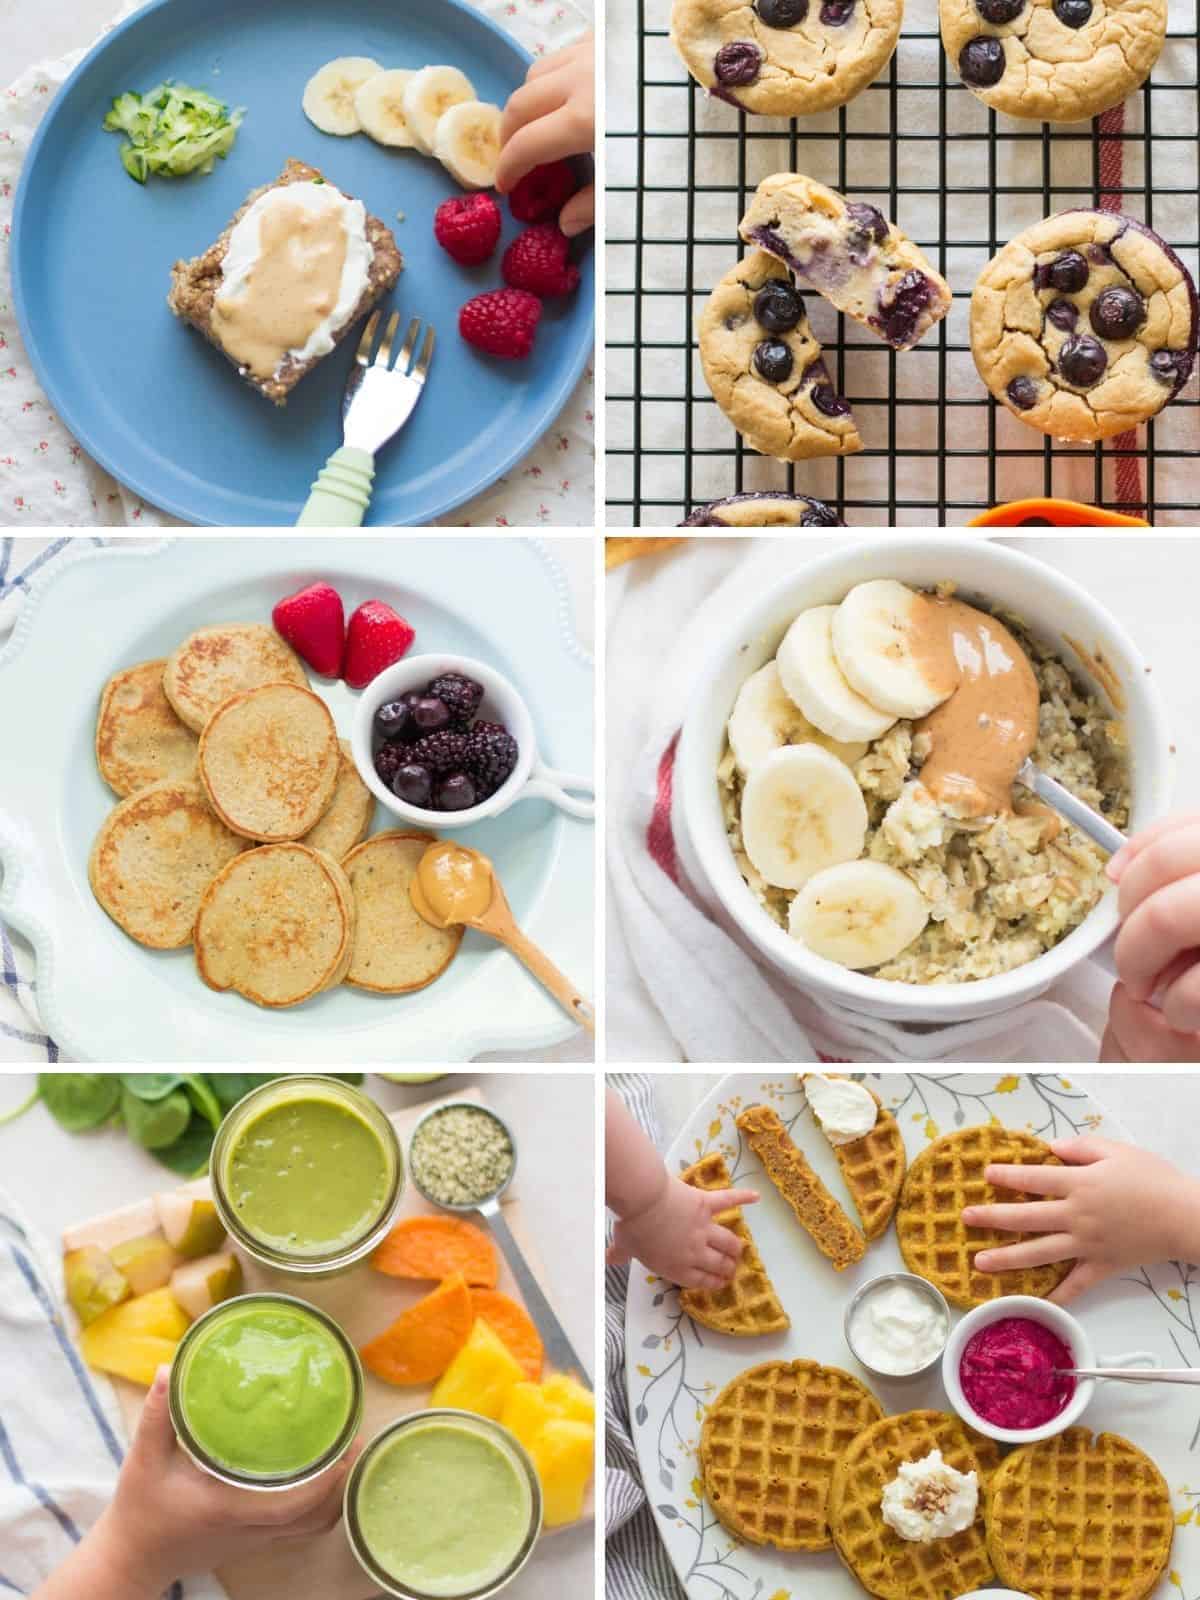 https://www.mjandhungryman.com/wp-content/uploads/2022/02/breakfast-for-toddlers.jpg